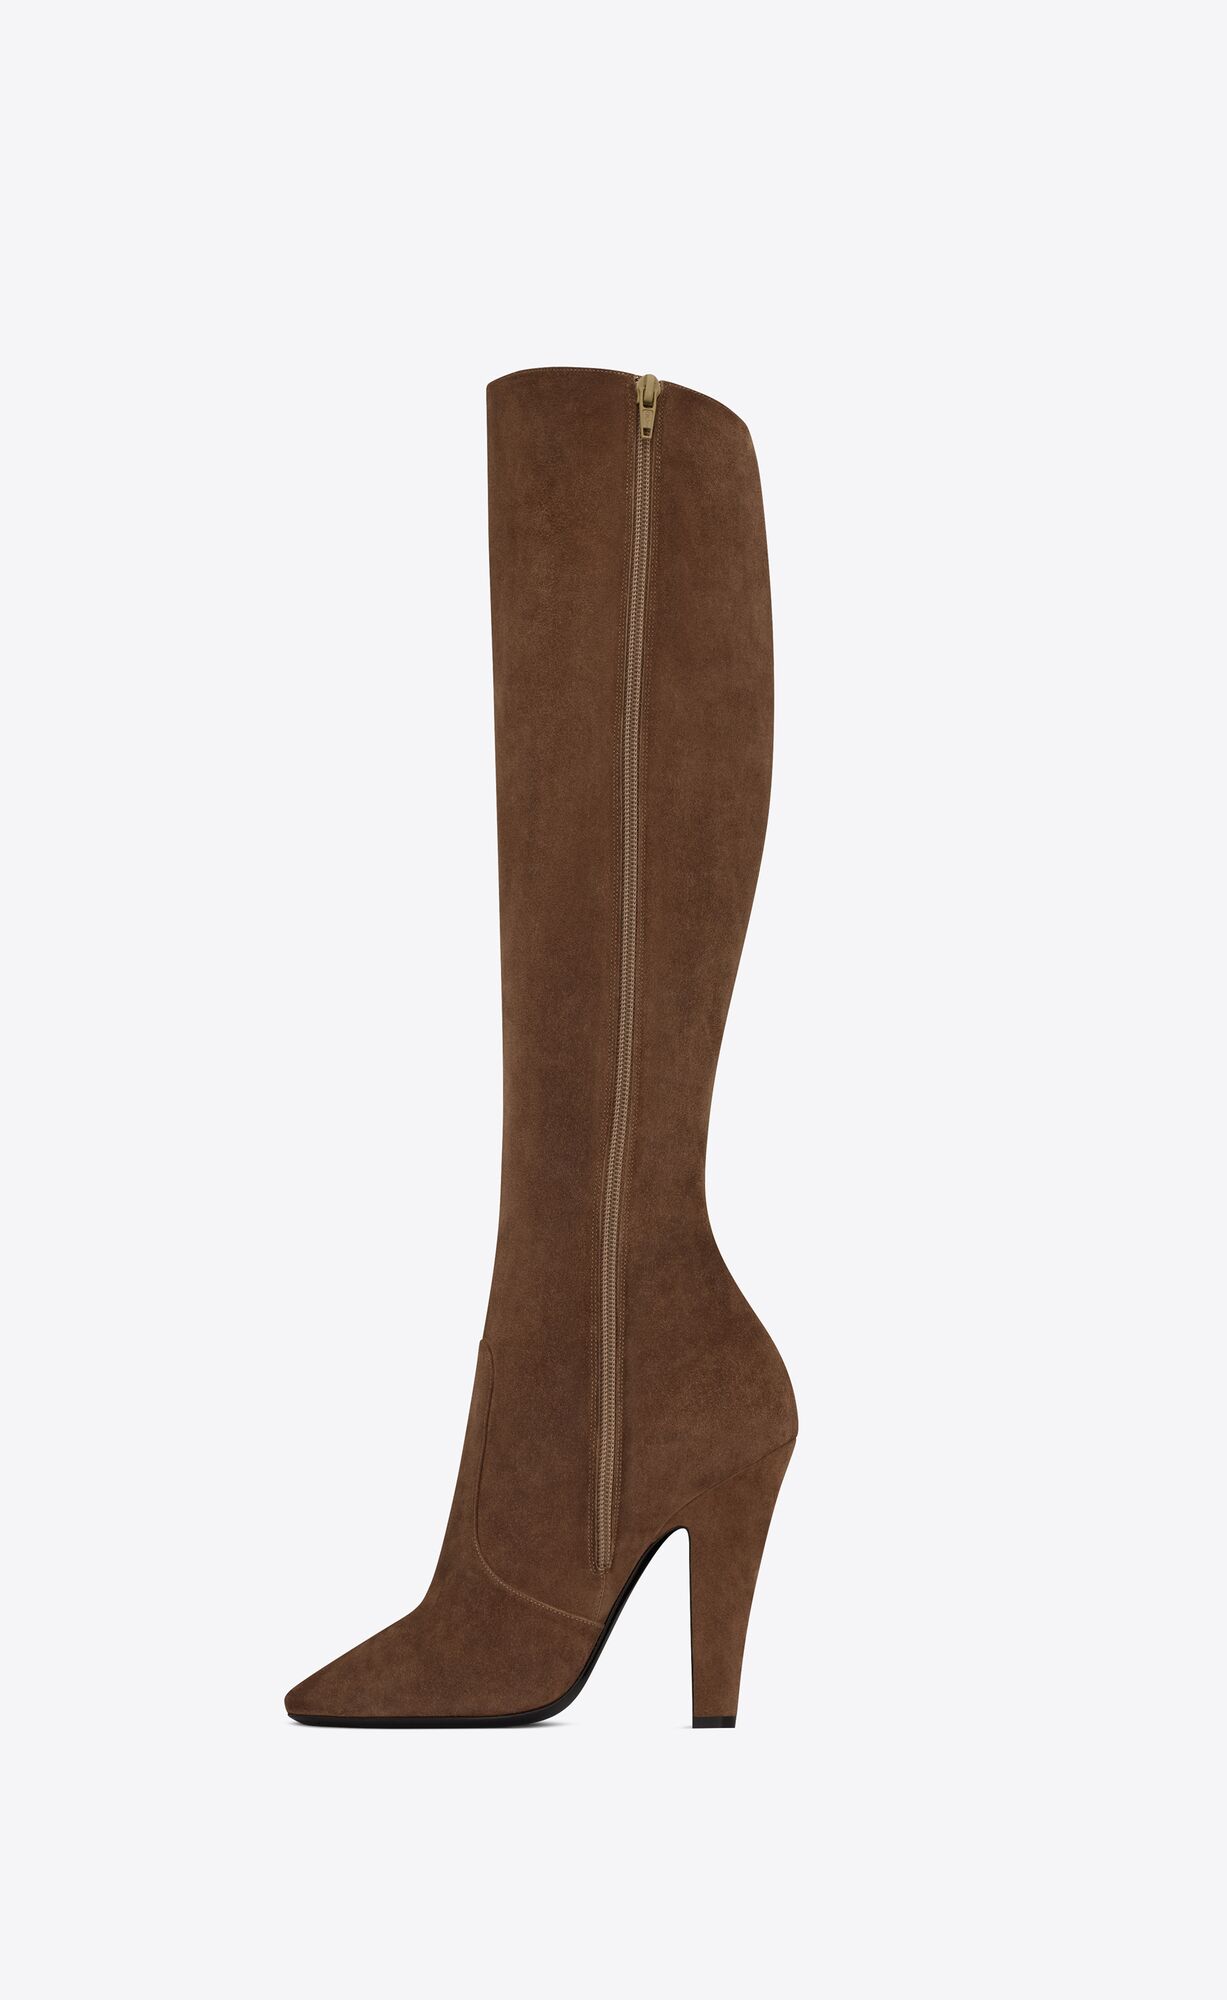 68 boots in suede | Saint Laurent Portugal | YSL.com